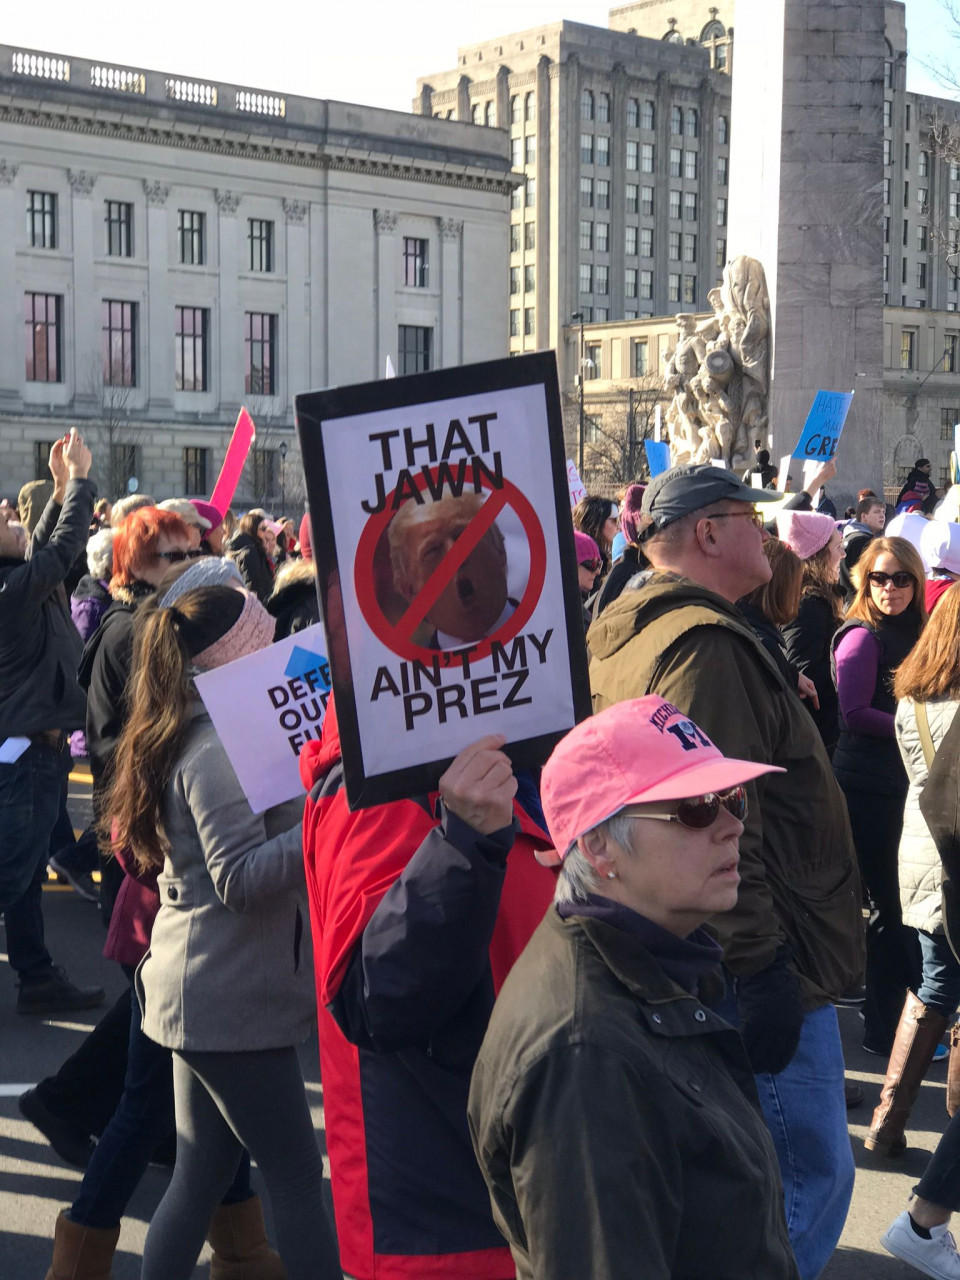 Philly Women's March 2018 - That <a class="bx-tag" rel="tag" href="https://wethepeople.care/page/view-channel-profile?id=1617"><s>#</s><b>jawn</b></a> ain't my prez